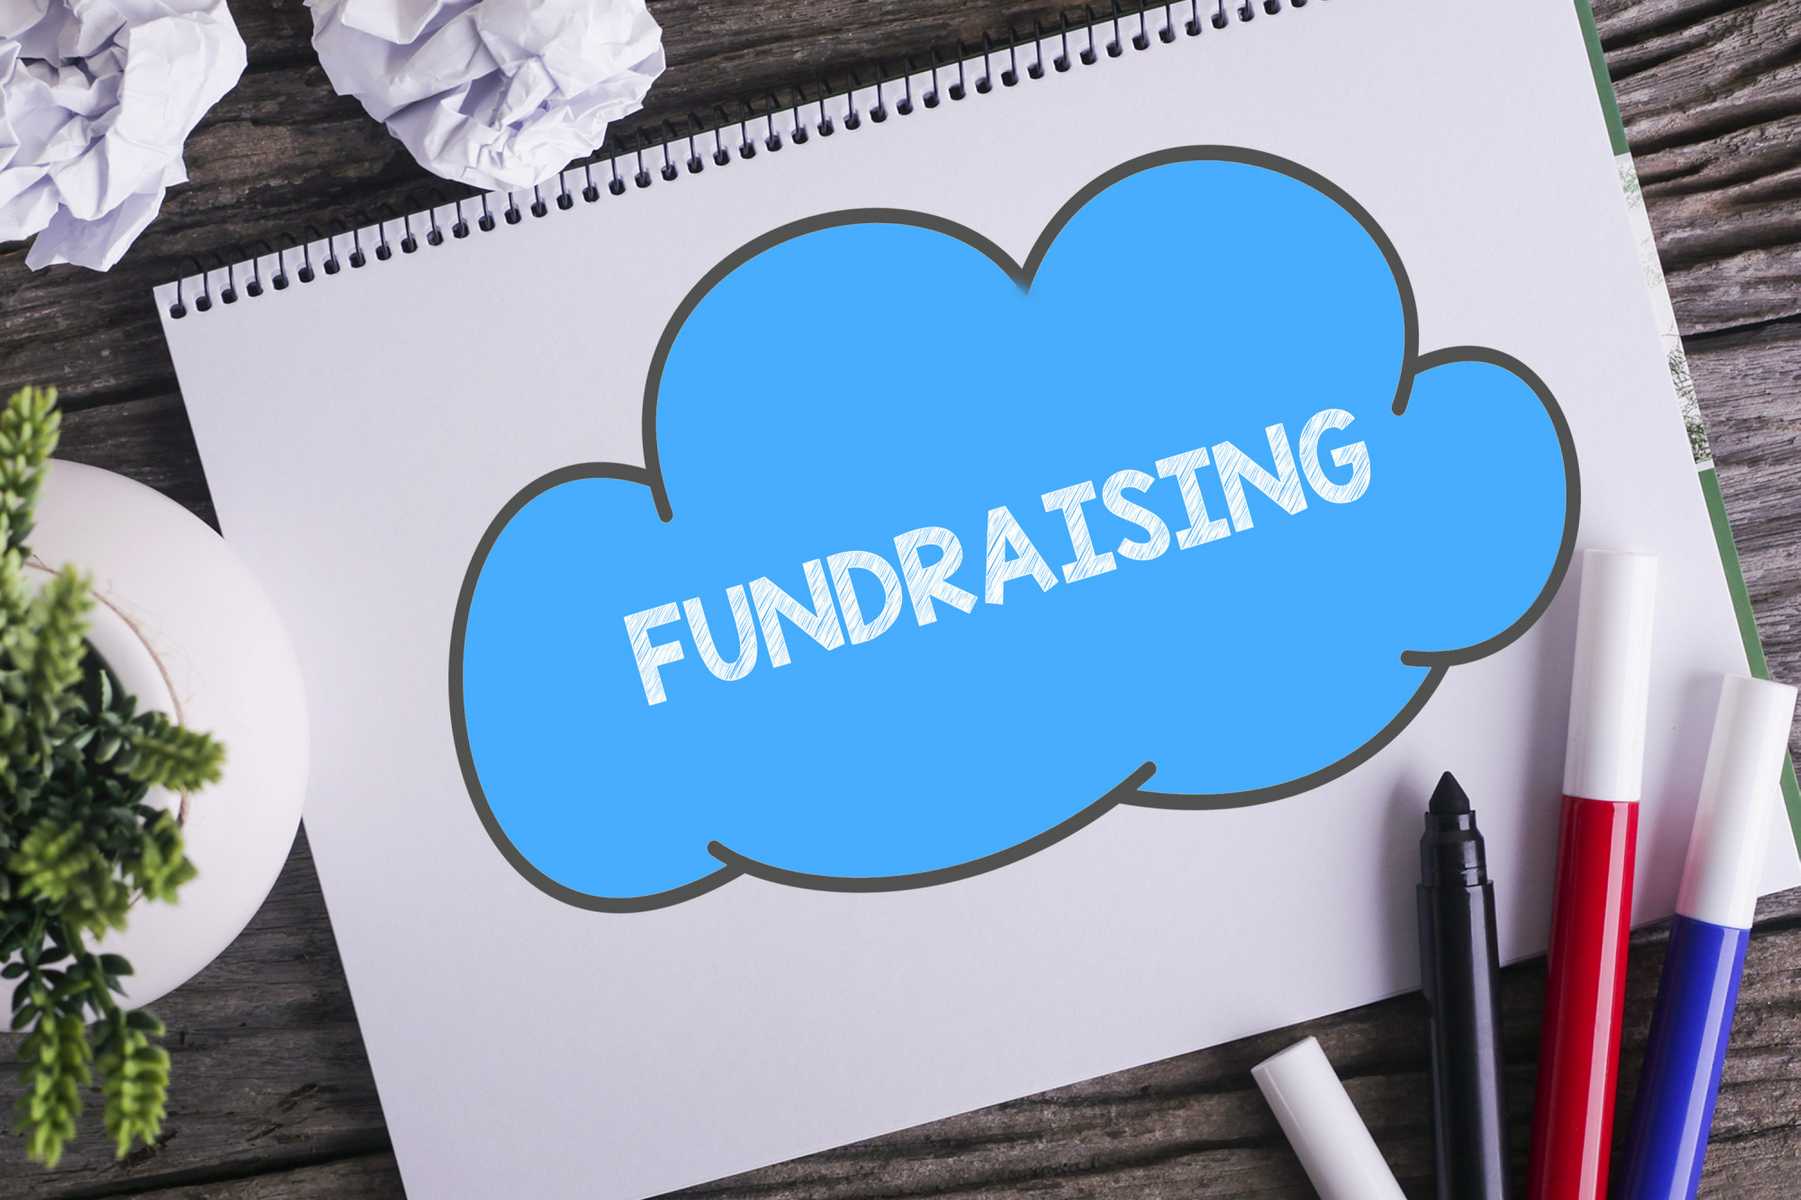 Fundraising Printed on Notepad Resting on Table